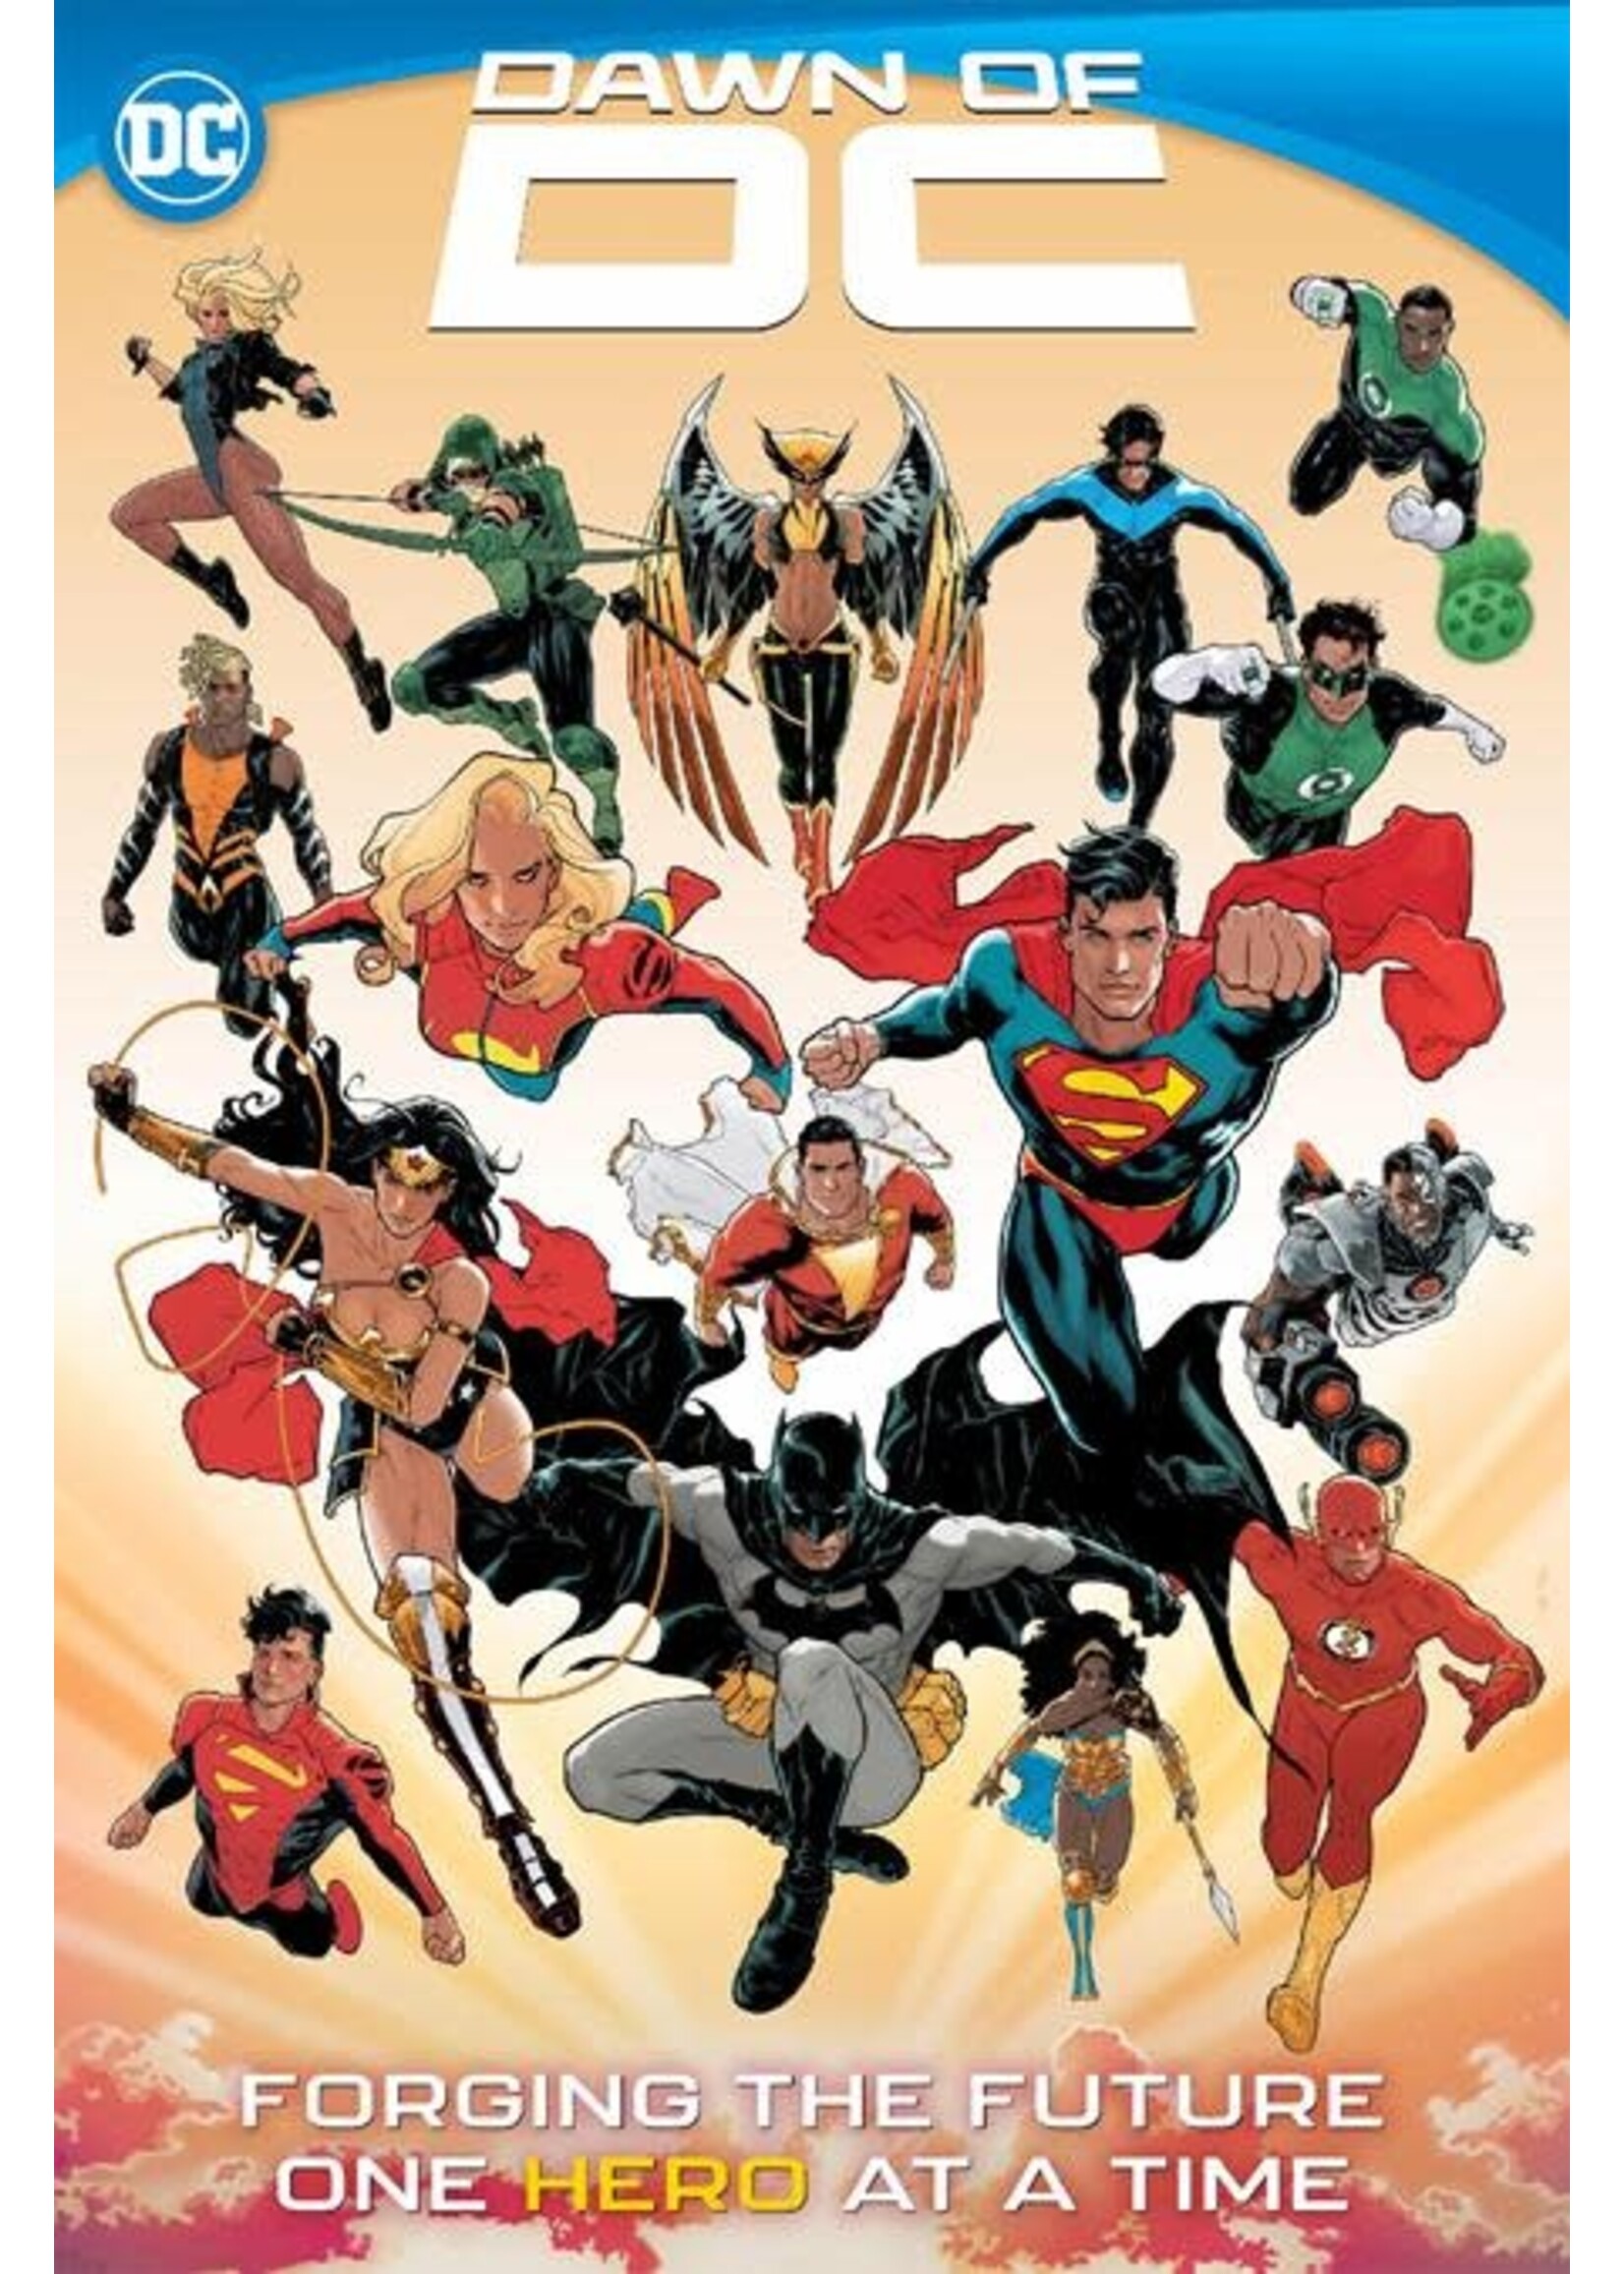 DAWN OF DC LED ACETATE POSTER by JEFF SPOKES Rolling Tales